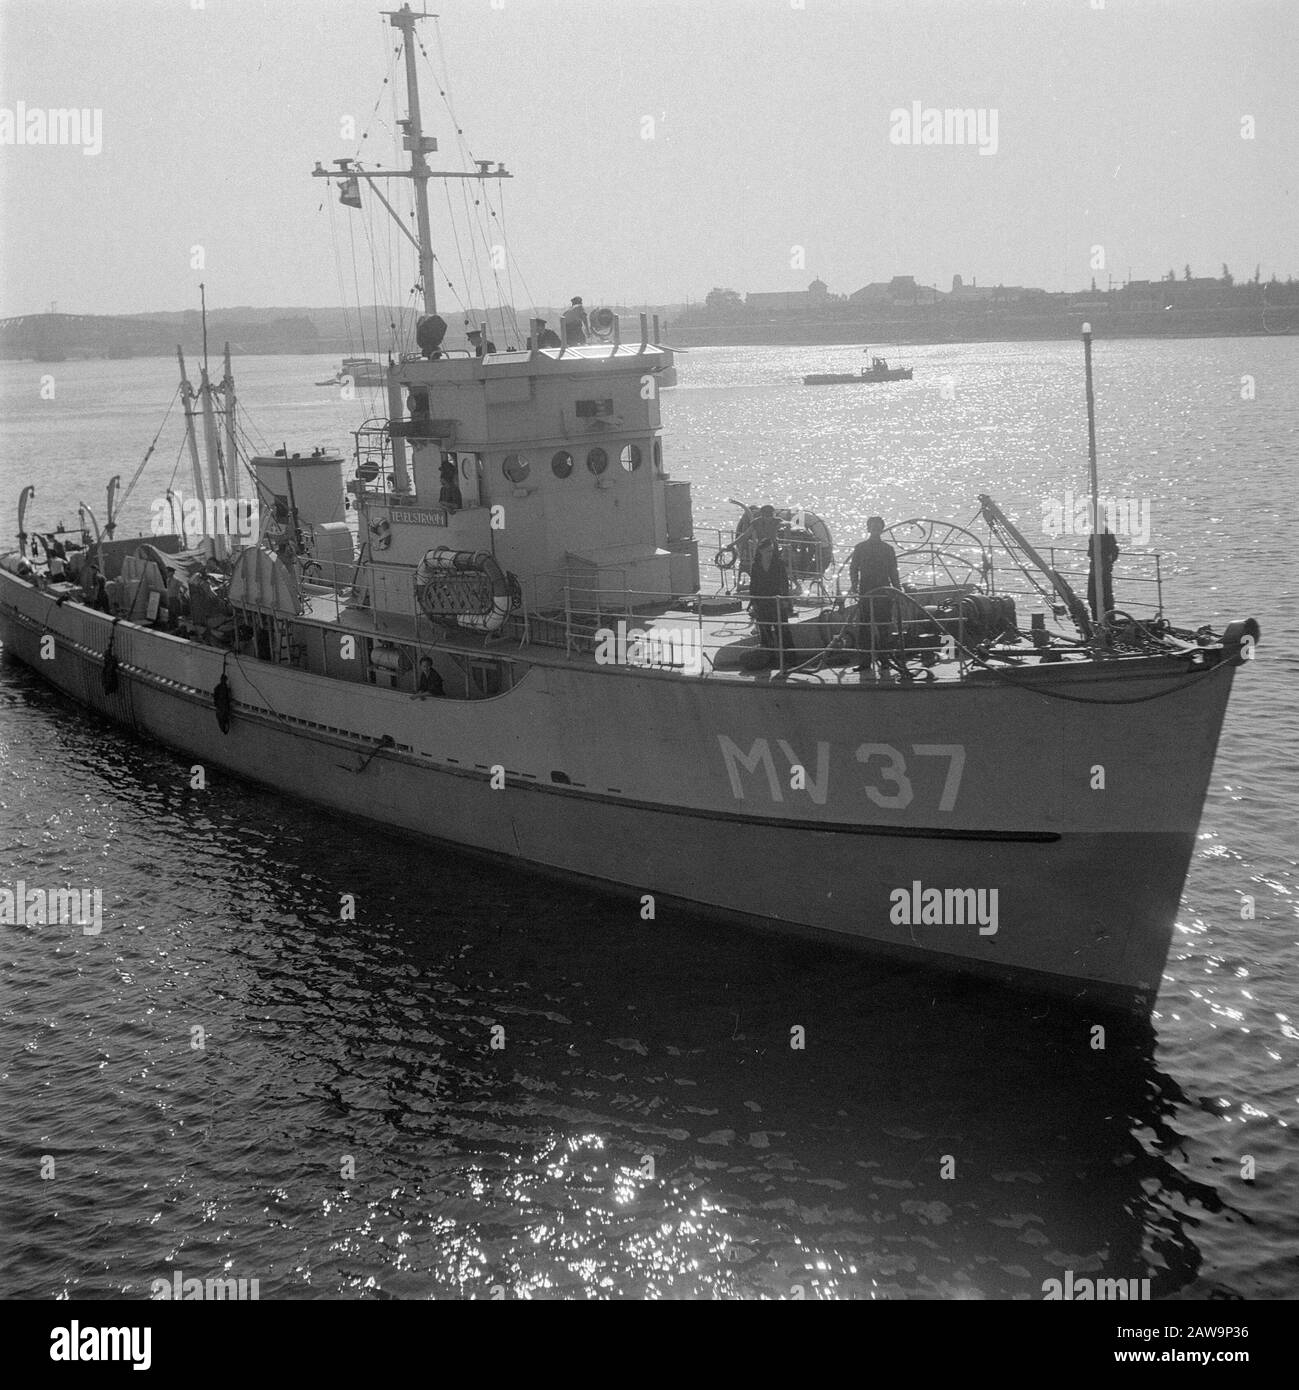 Reportage Vulcan Annotation: Minesweeper MV 37 Hr. Ms. Marsdiep of the  Royal Navy. The ship is as BYMS 38 of the YMS-class built by the American  shipyard Barbour Boat Works from New